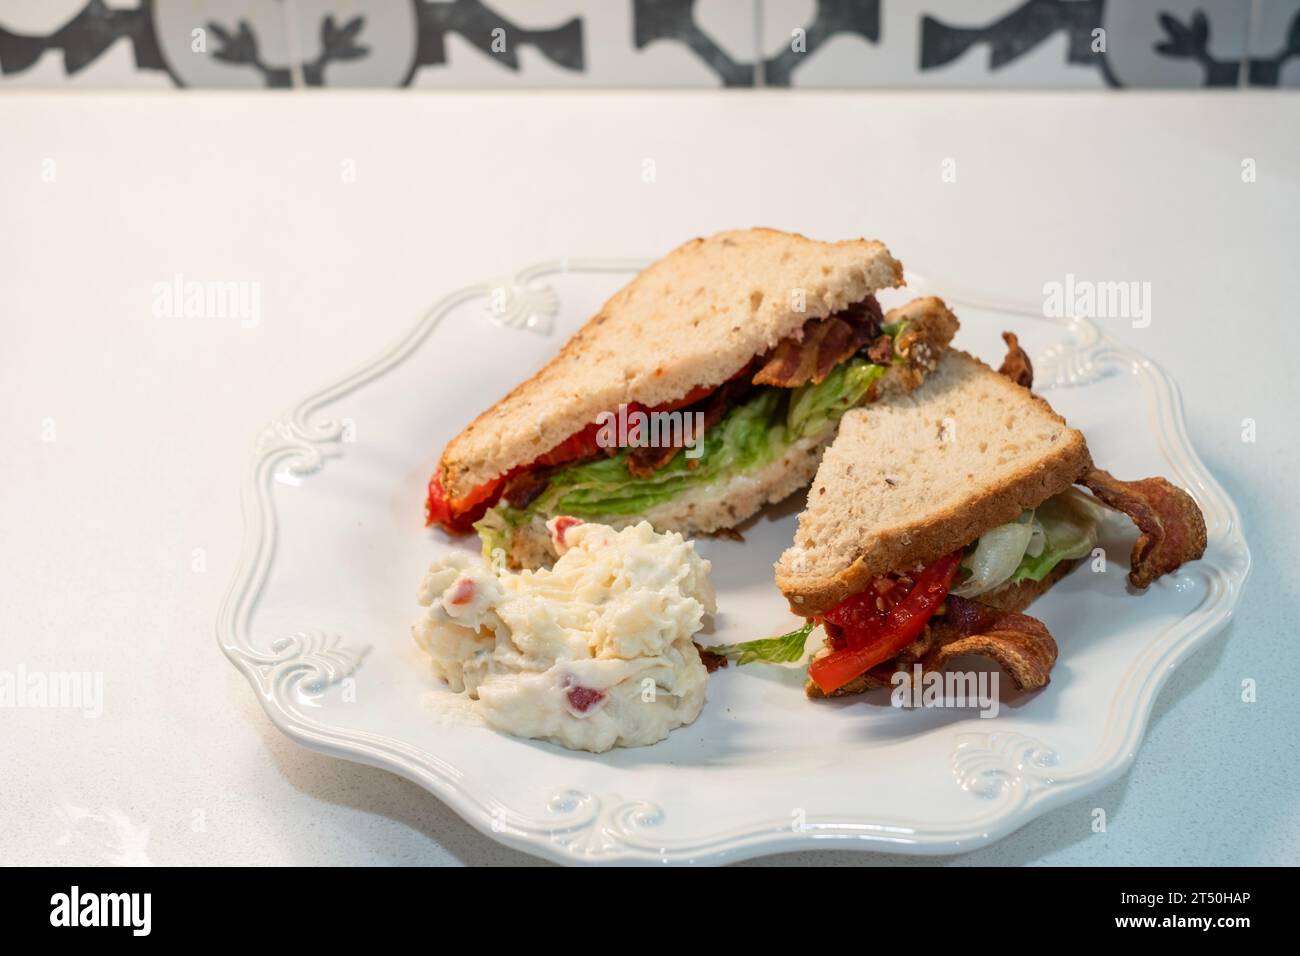 BLT, a bacon, tomato & lettuce sandwich made with oatnut bread, with a serving of potato salad on a white plate. USA. Stock Photo